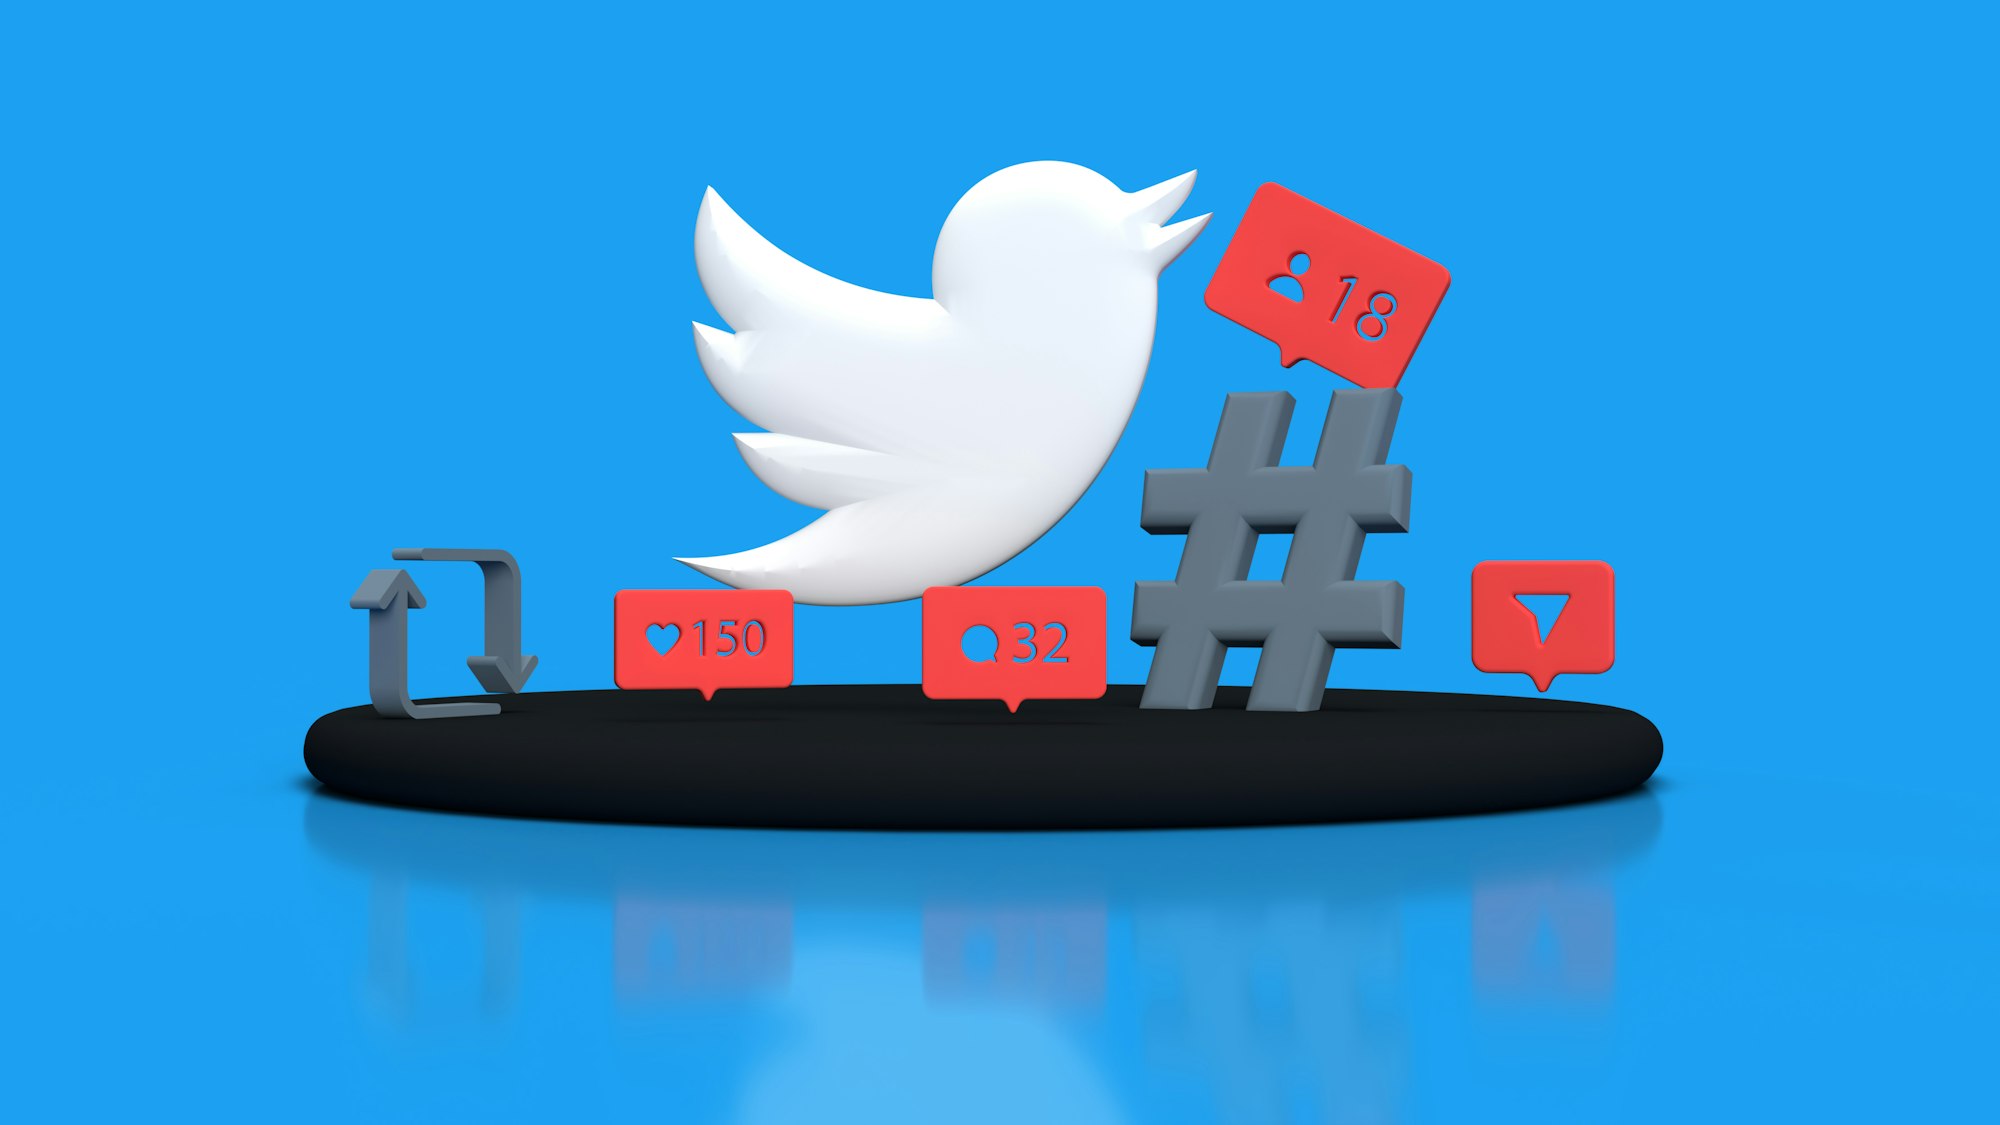 Twitter hashtags: How to find and use the right ones for marketing?